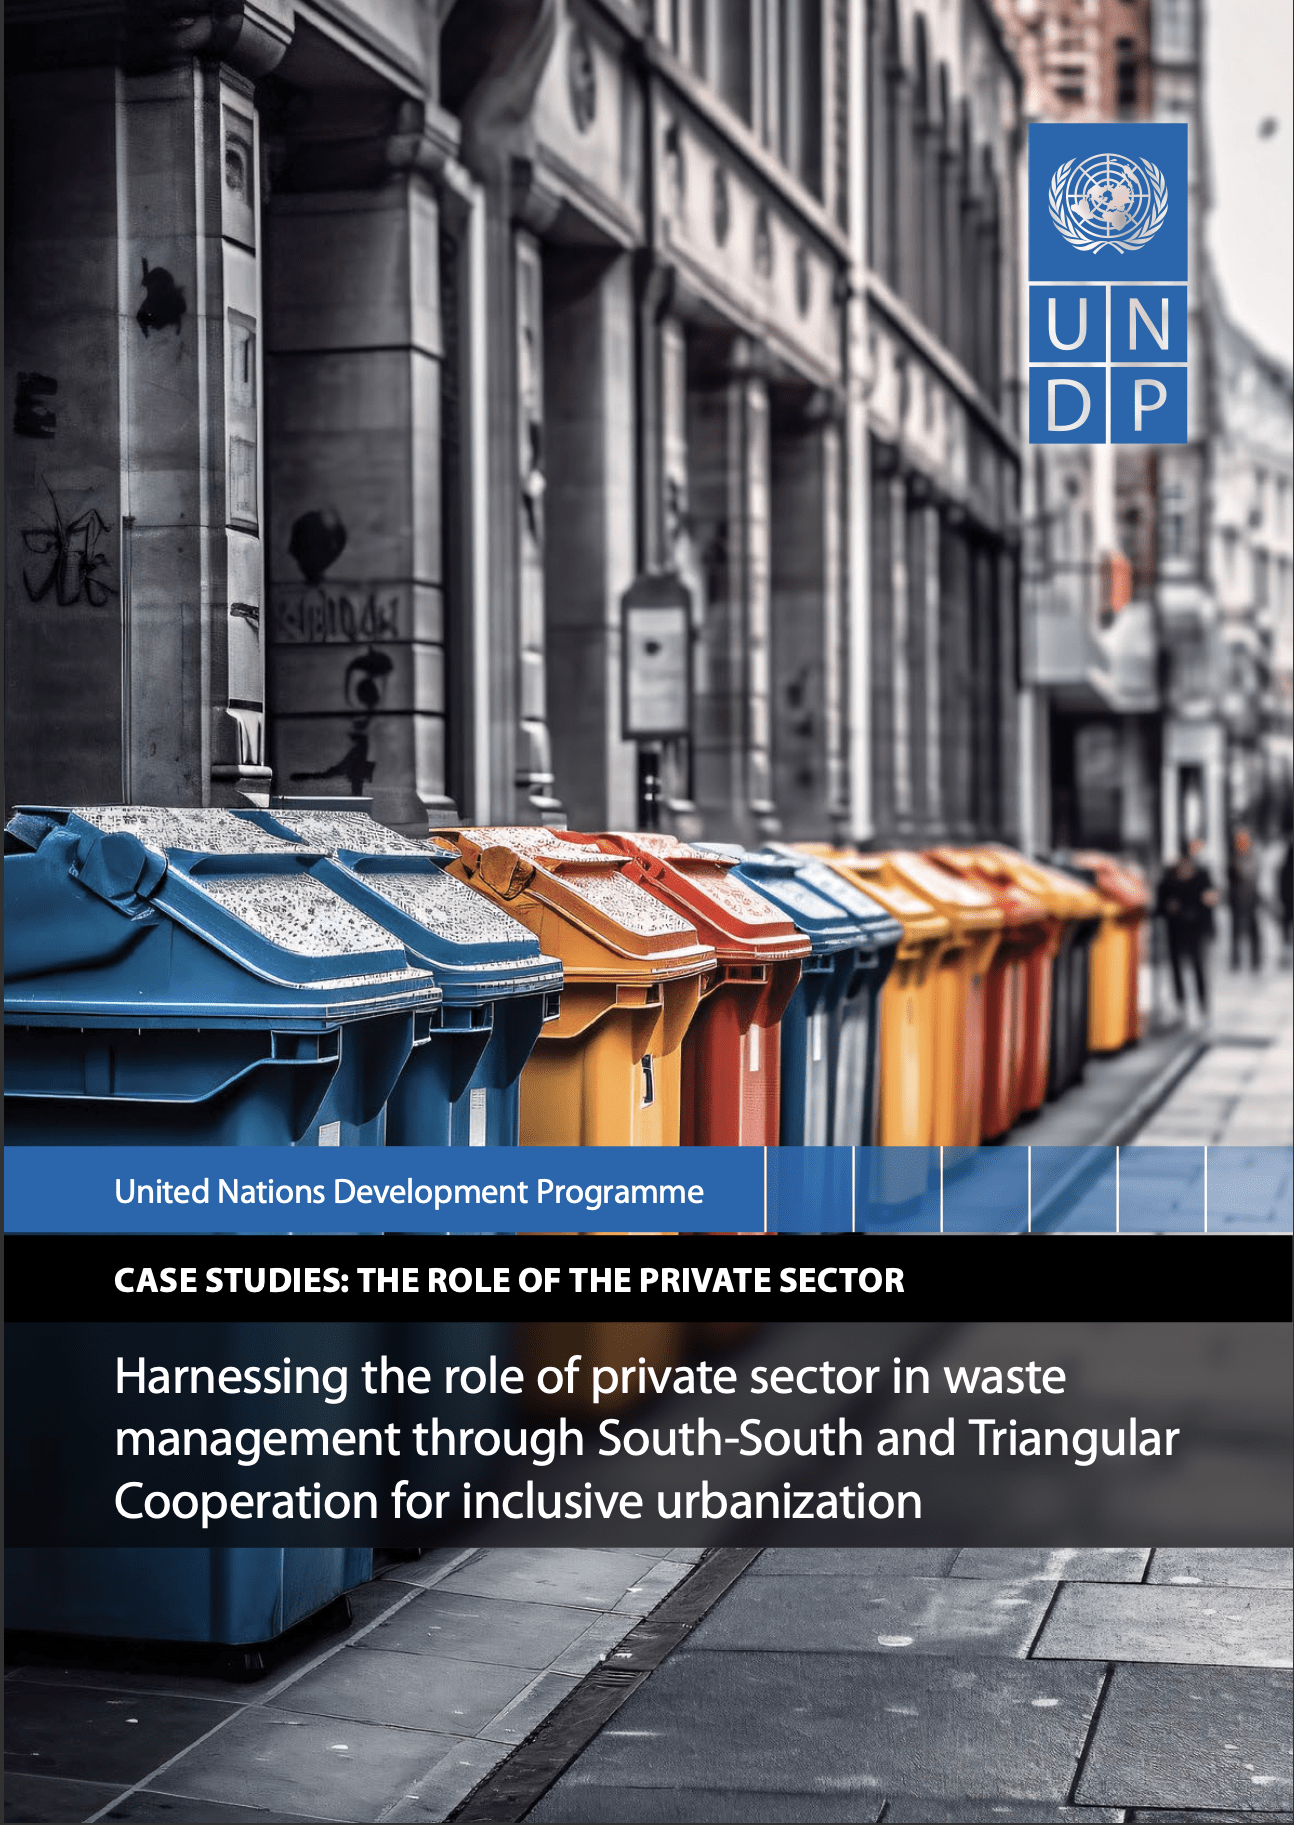 Harnessing the Role of Private Sector in Waste Management through South-South and Triangular Cooperation for Inclusive Urbanization